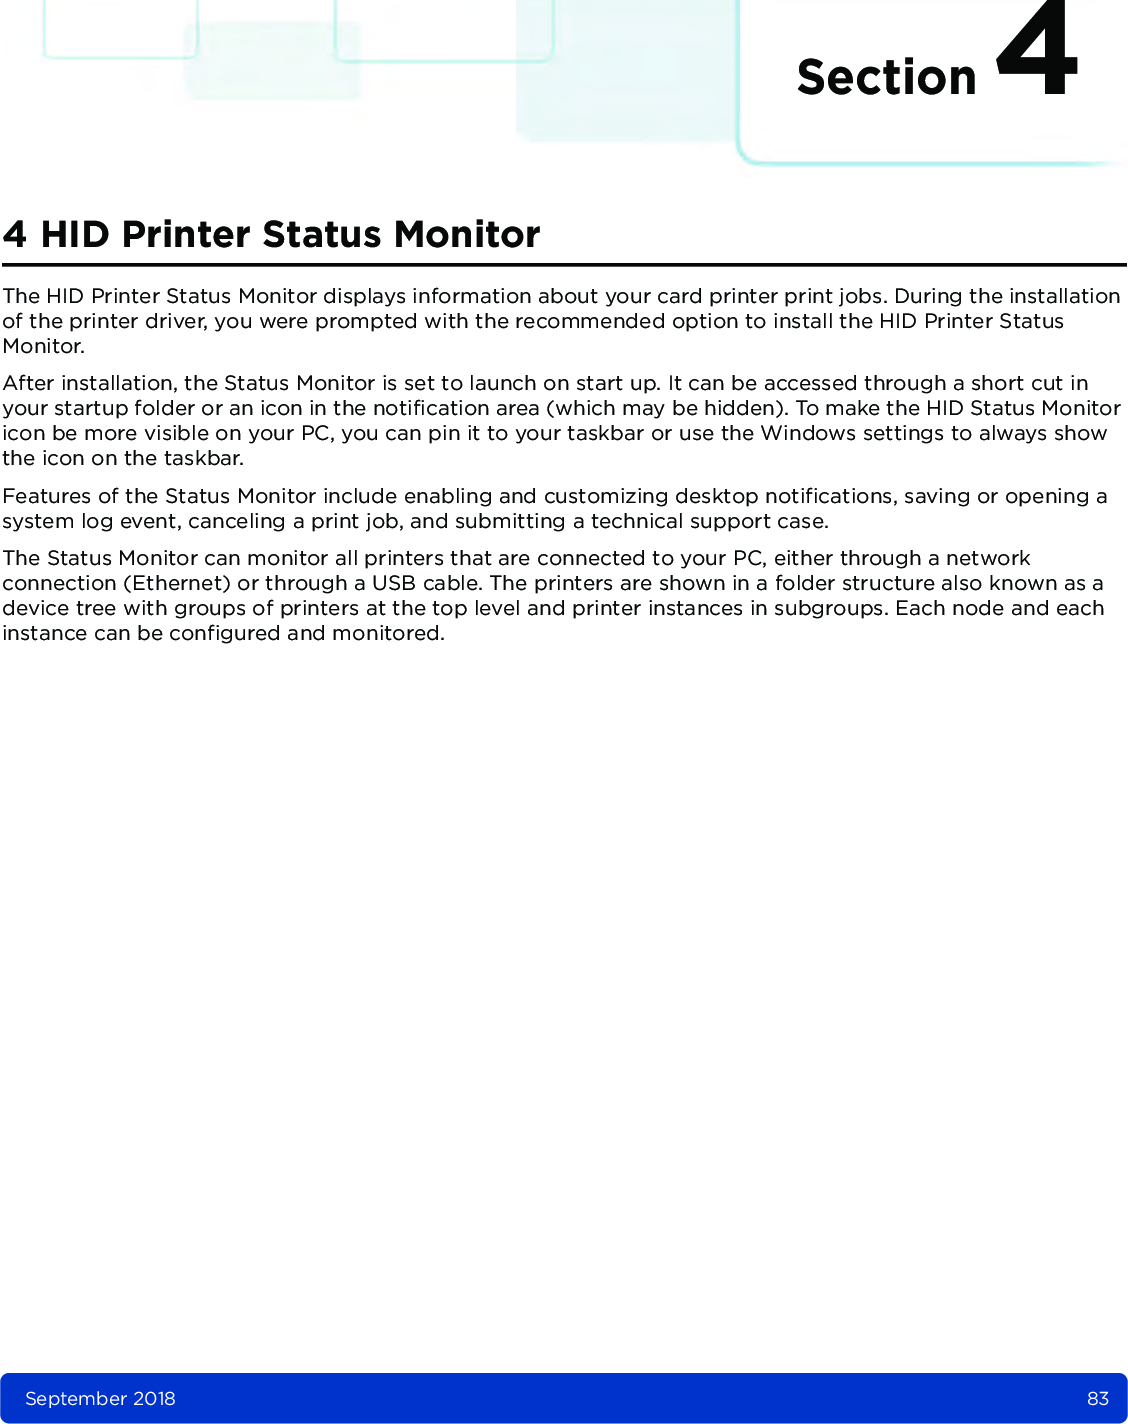 Section 4September 2018 834 HID Printer Status MonitorThe HID Printer Status Monitor displays information about your card printer print jobs. During the installation of the printer driver, you were prompted with the recommended option to install the HID Printer Status Monitor.After installation, the Status Monitor is set to launch on start up. It can be accessed through a short cut in your startup folder or an icon in the notification area (which may be hidden). To make the HID Status Monitor icon be more visible on your PC, you can pin it to your taskbar or use the Windows settings to always show the icon on the taskbar.Features of the Status Monitor include enabling and customizing desktop notifications, saving or opening a system log event, canceling a print job, and submitting a technical support case.The Status Monitor can monitor all printers that are connected to your PC, either through a network connection (Ethernet) or through a USB cable. The printers are shown in a folder structure also known as a device tree with groups of printers at the top level and printer instances in subgroups. Each node and each instance can be configured and monitored.